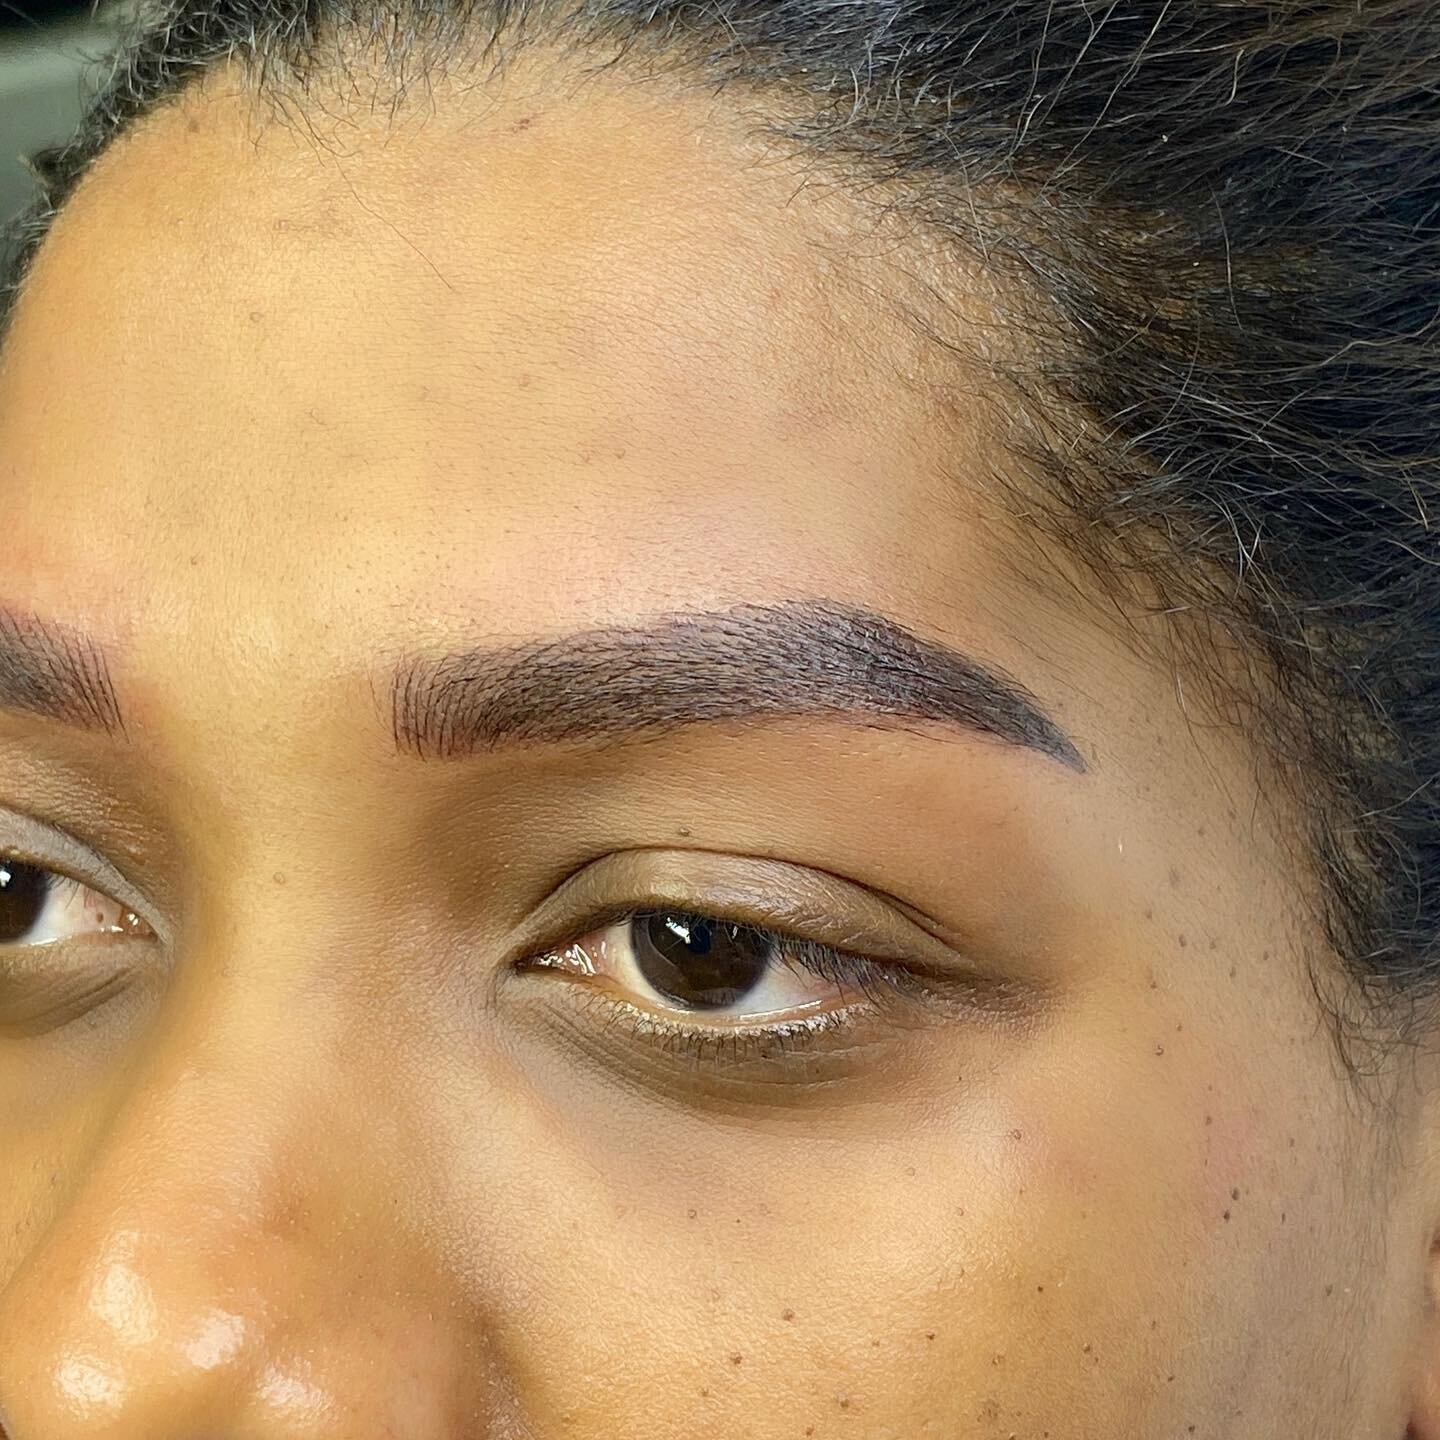 Combo microblading + shading 
#microblading #shading #shadingbrows #browsart #browsartist #pmu #pmuartist #pmubrows #pmueyebrows #lovebrows #loveyourself #loveyourbrows #bayarea #bayareabrows #bayareabrowspecialist #embroidery #embroiderybrows #beaut